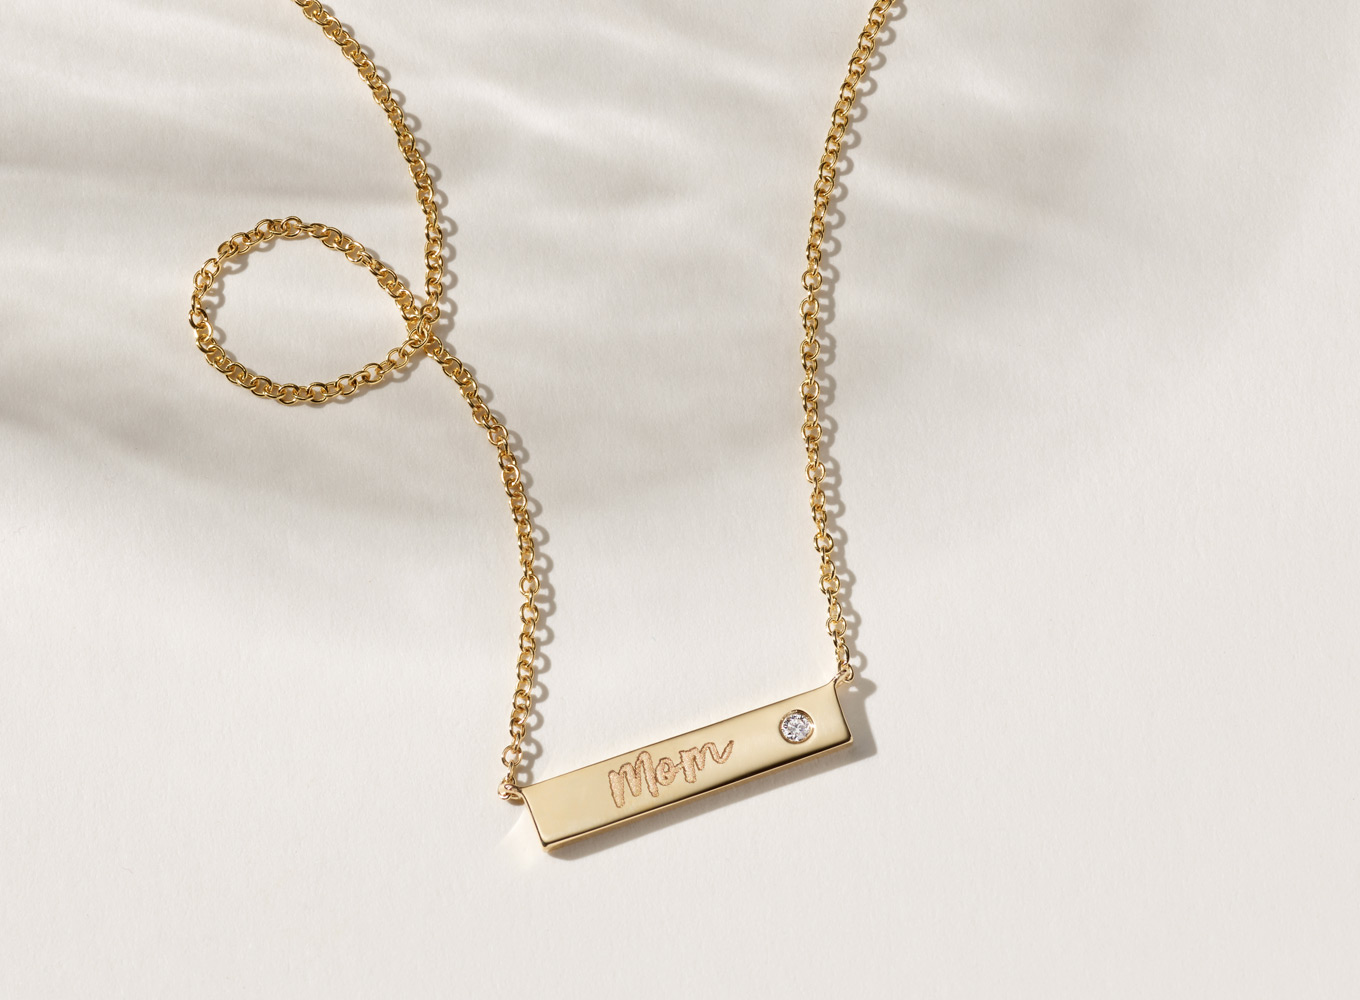 Diamond Accent Engravable Bar Necklace (18 in). Featuring a natural diamond accent for a touch of sparkle, this this 14-karat yellow gold bar necklace is the perfect canvas for a custom engraving. A matching cable chain with a lobster clasp offers worry-free daily wear.